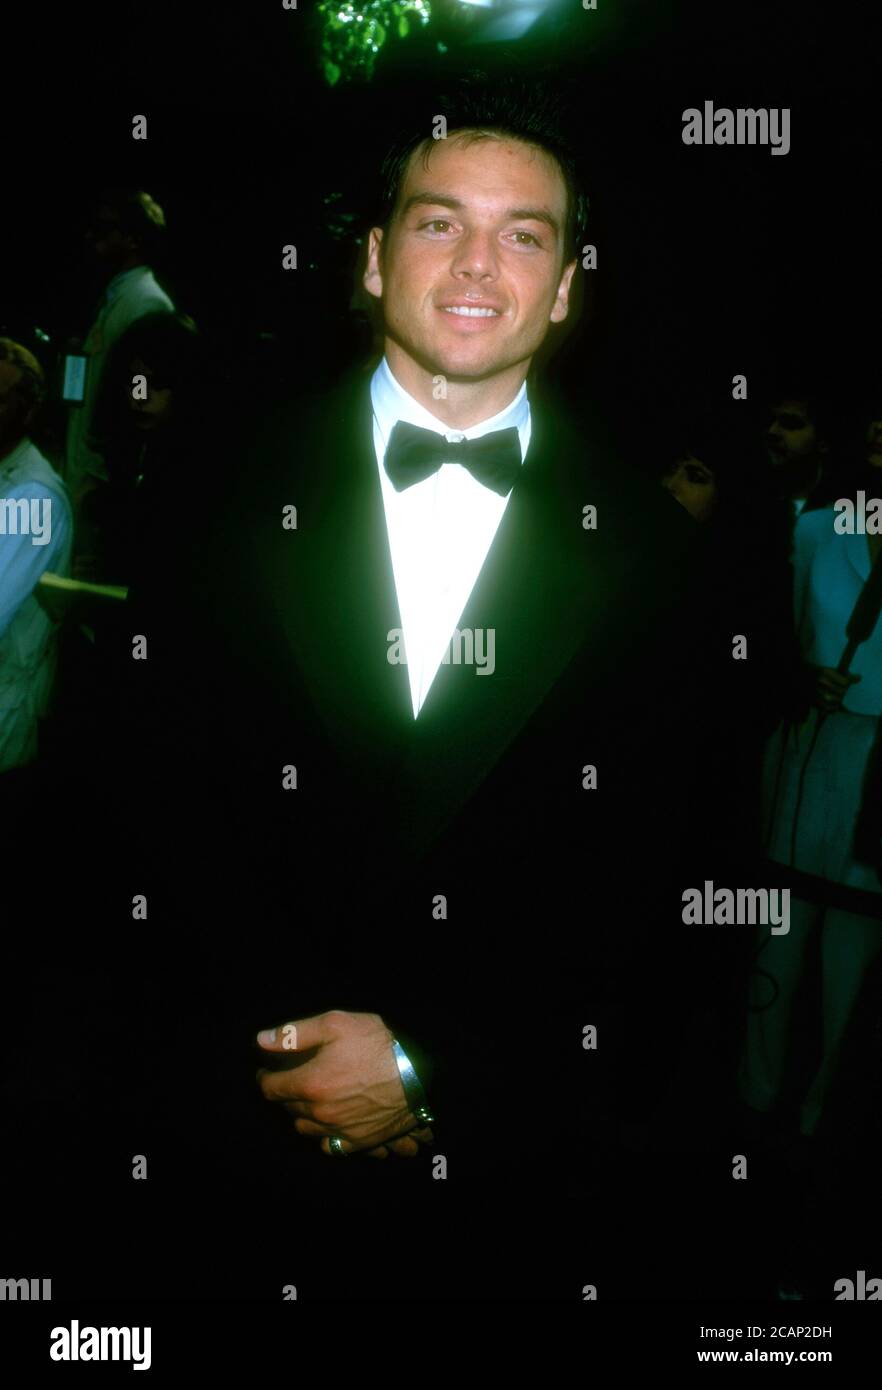 Universal City, California, USA 10th March 1996 Actor Jason Gedrick attends the 22nd Annual People's Choice Awards on March 10, 1996 at Universal Studios in Universal City, California, USA. Photo by Barry King/Alamy Stock Photo Stock Photo